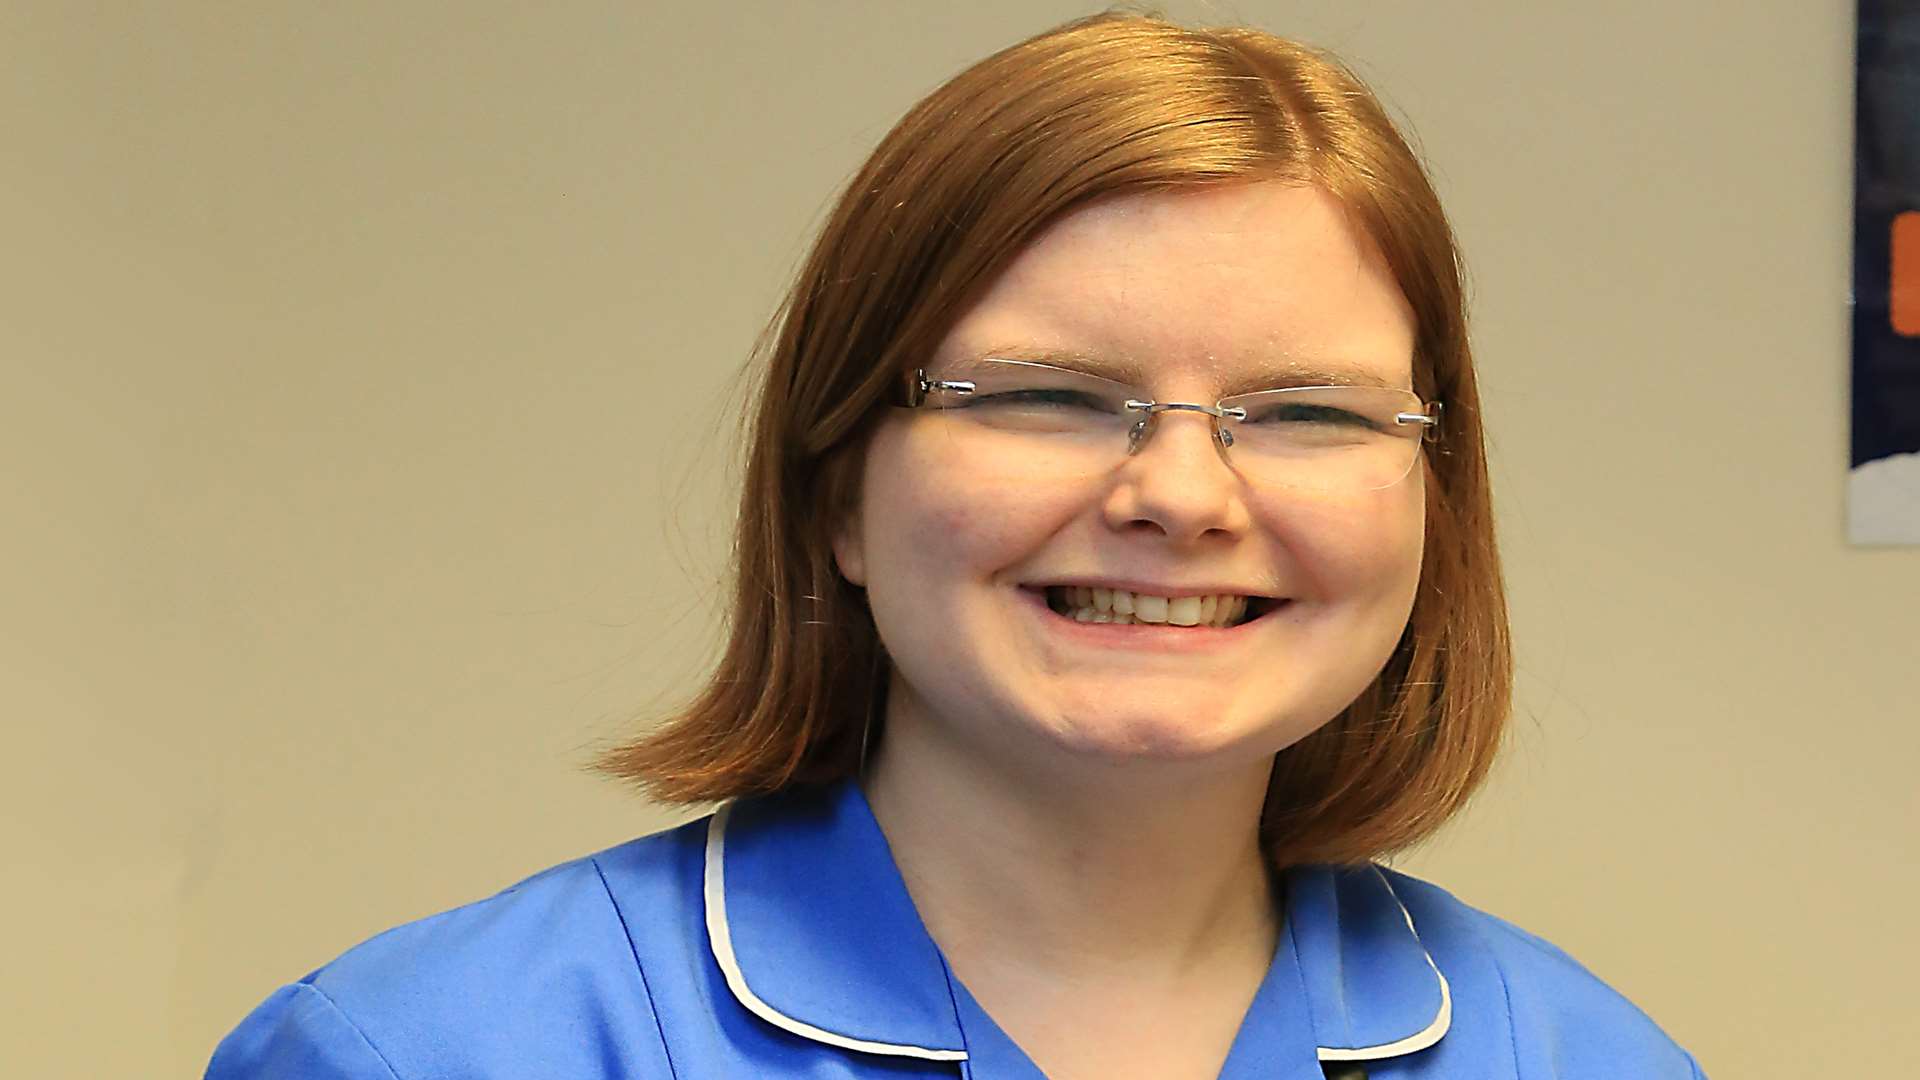 Maria Watson, specialist midwife and pregnancy adviser